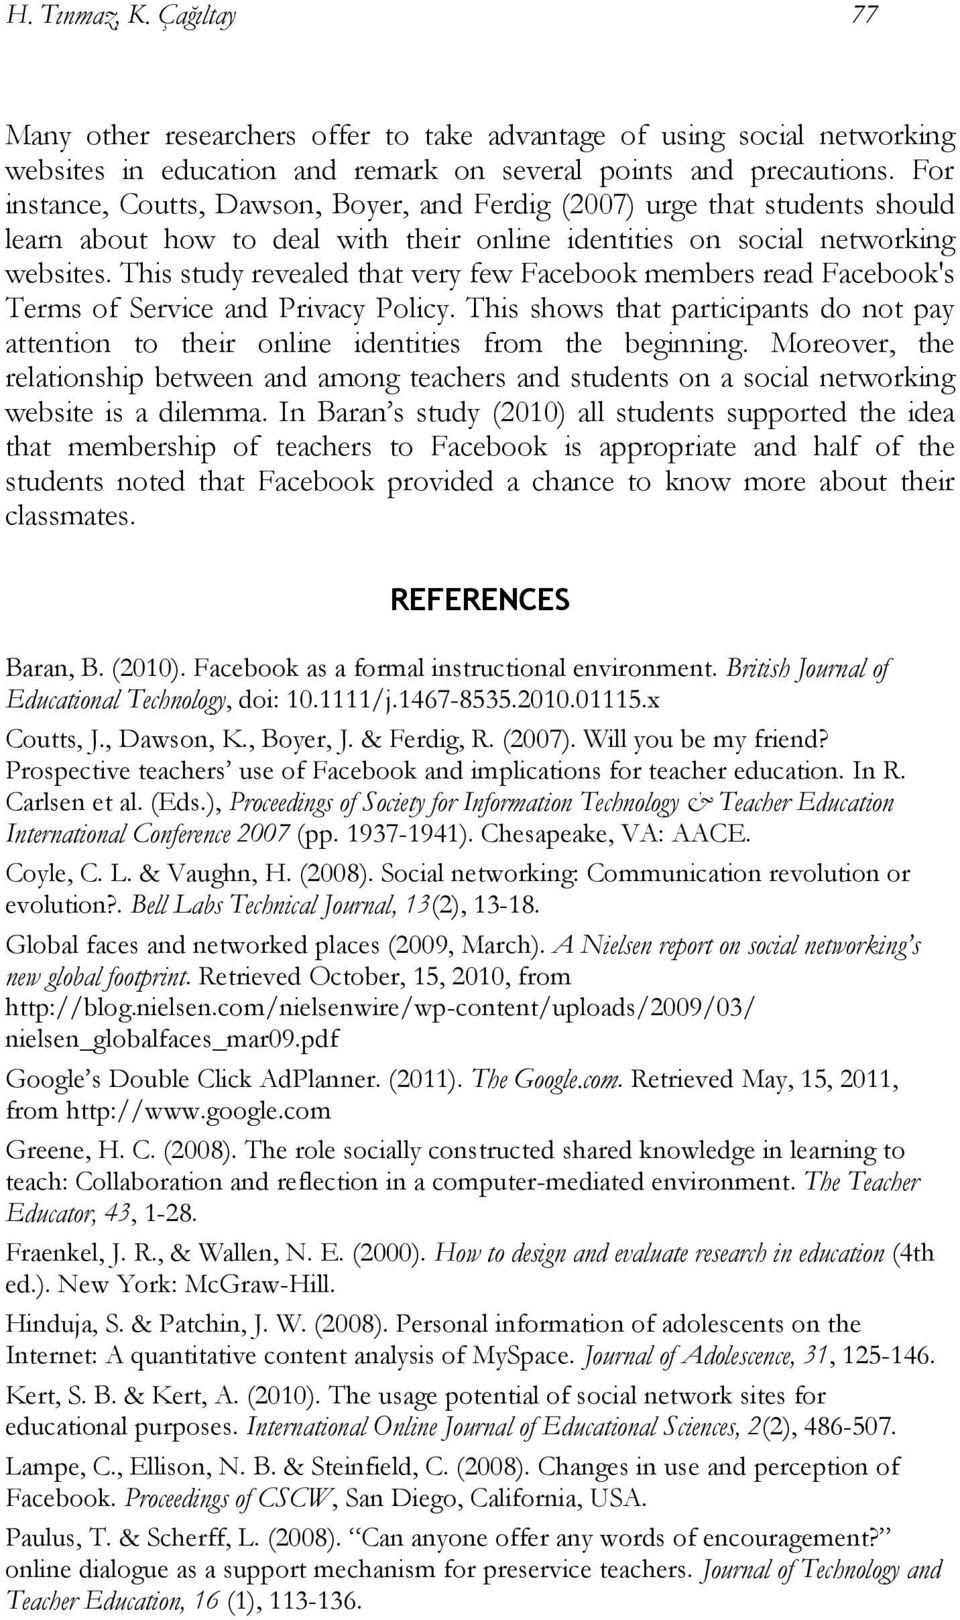 This study revealed that very few Facebook members read Facebook's Terms of Service and Privacy Policy. This shows that participants do not pay attention to their online identities from the beginning.